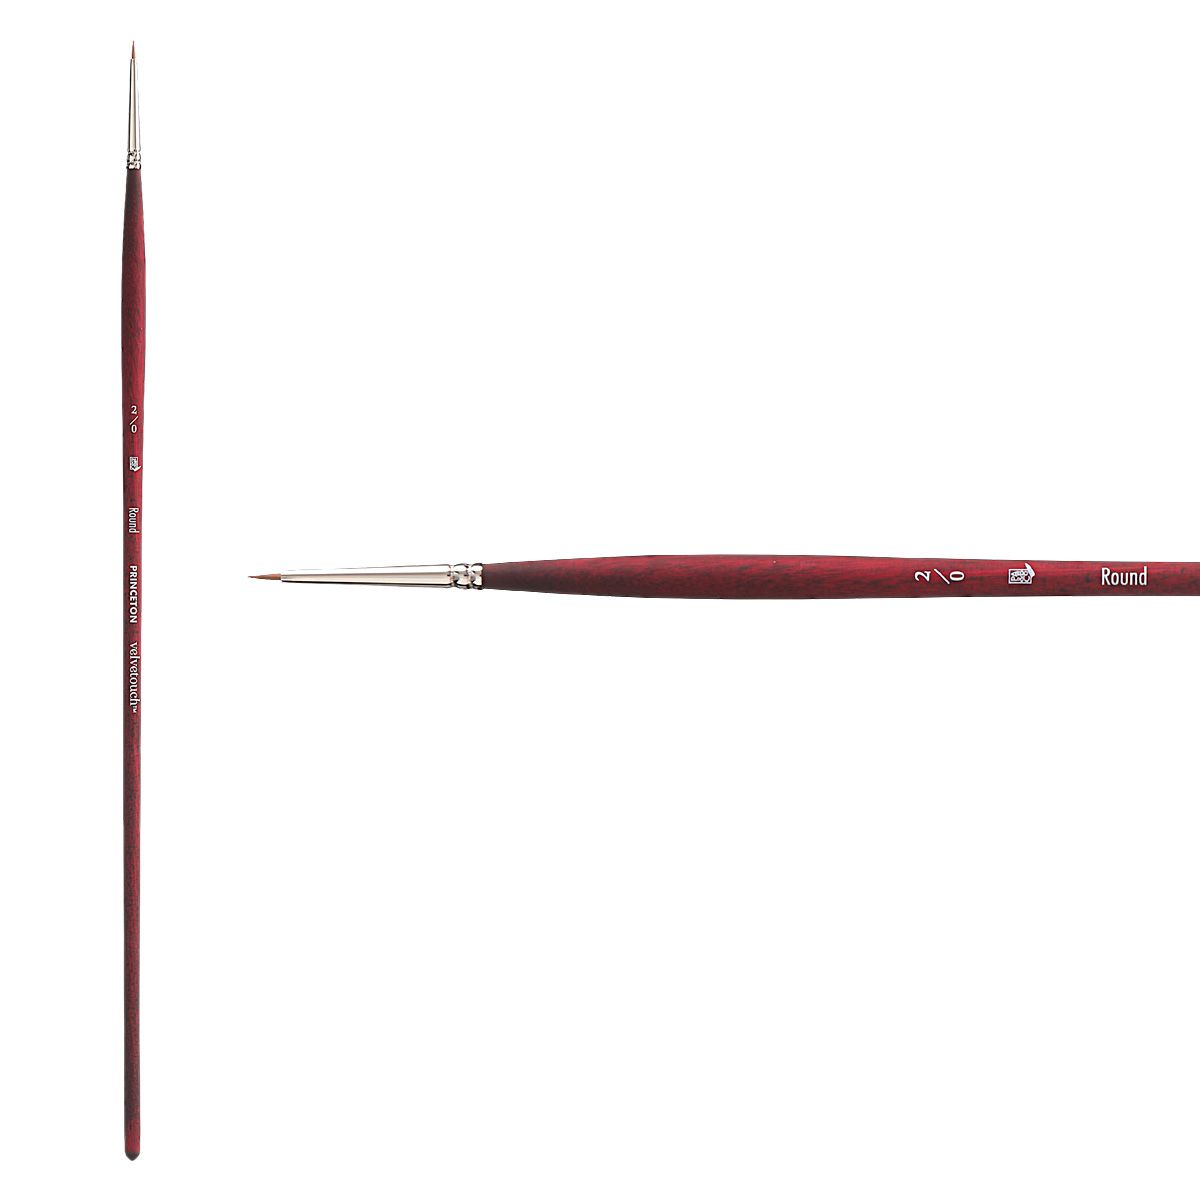 Velvetouch Synthetic Long Handle Series 3900 Brush, Round Size #20